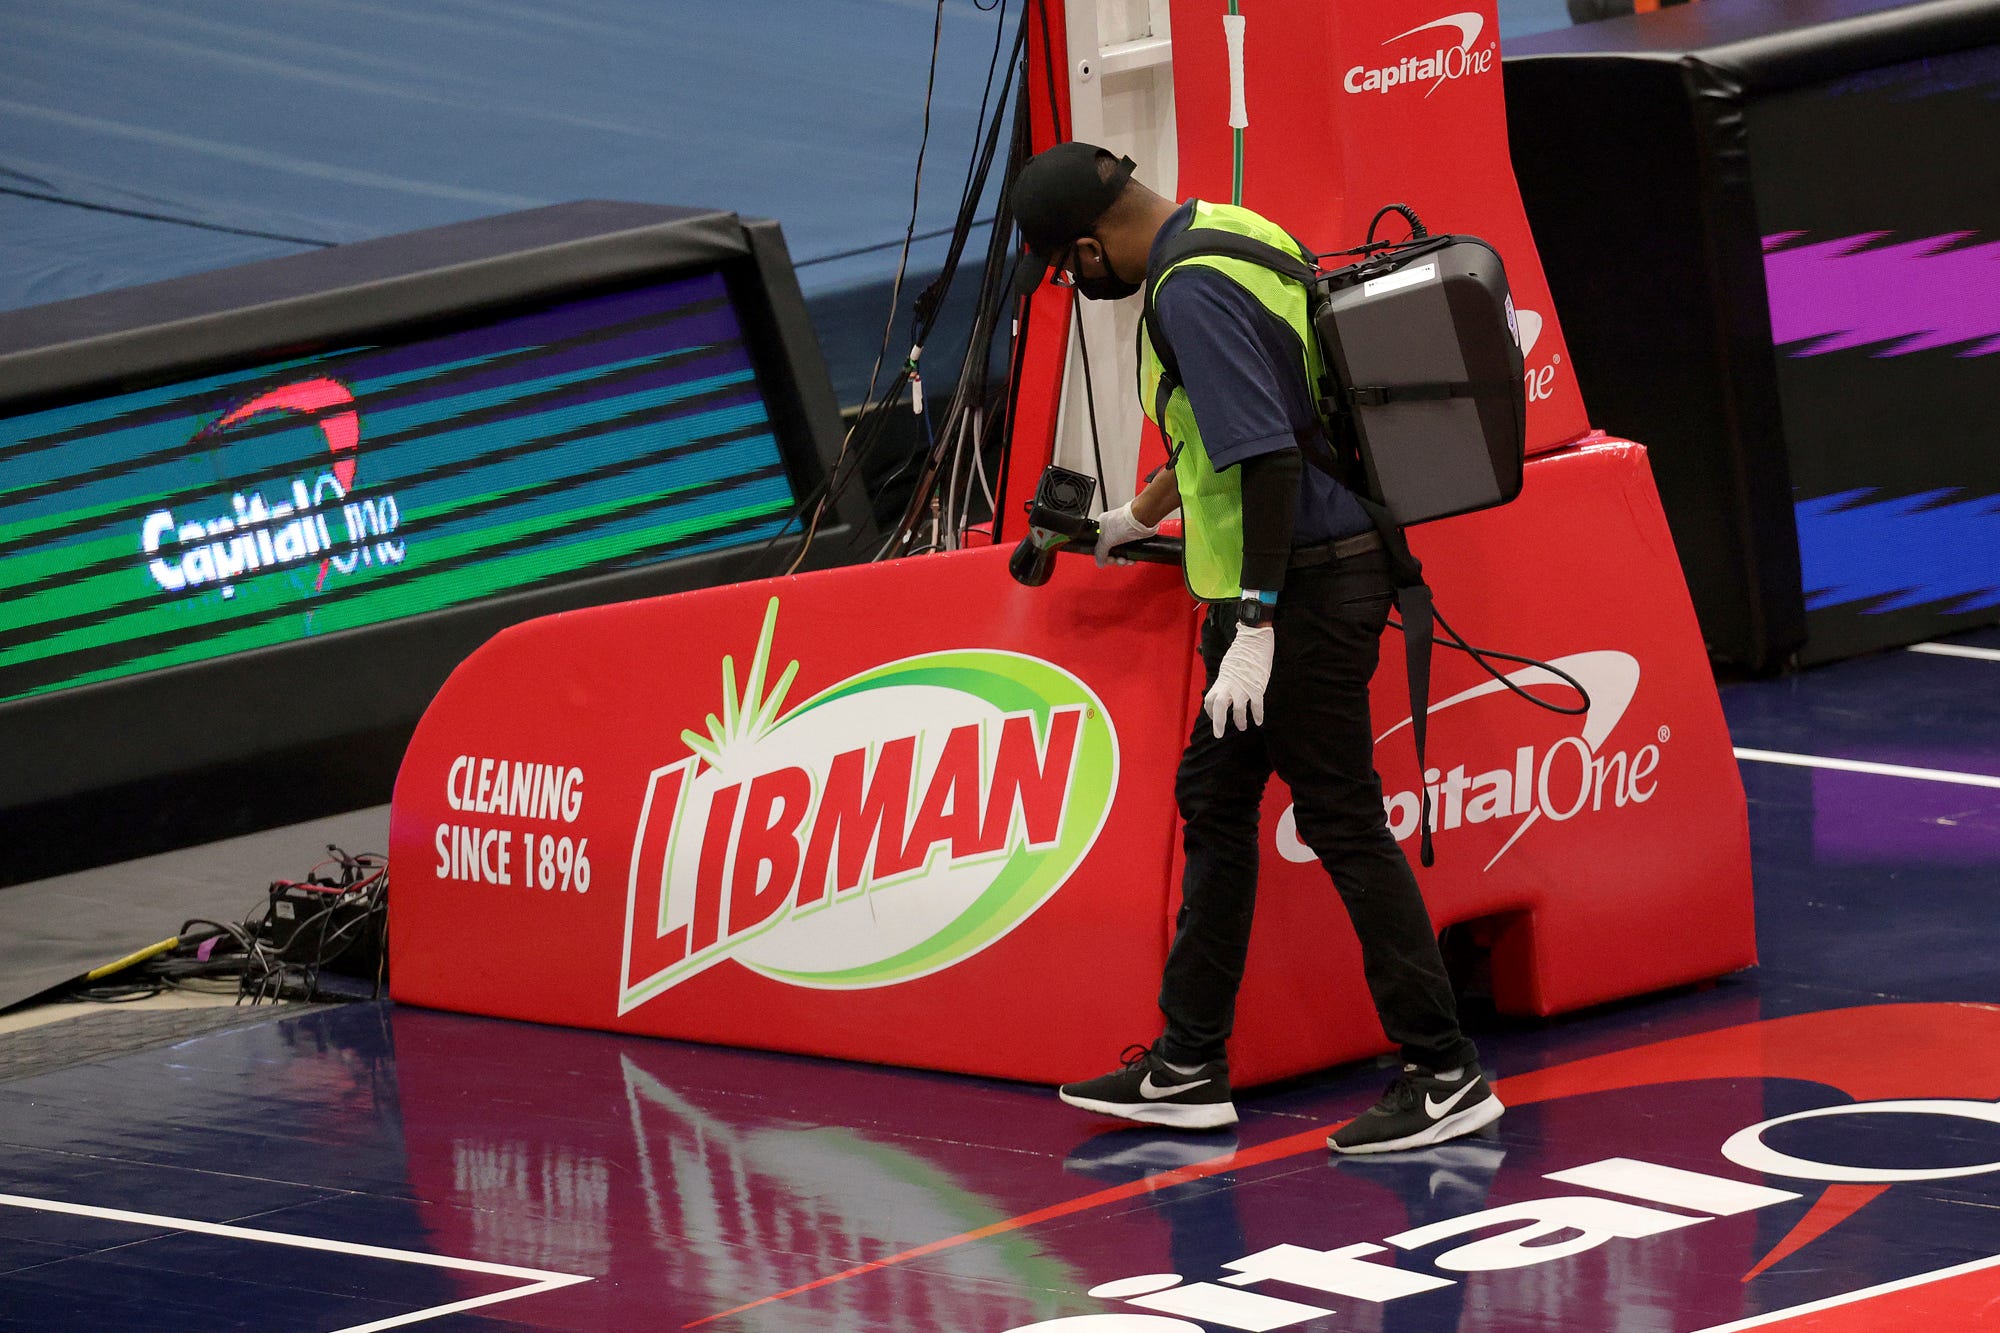 A worker disinfects the basket before the start of a preseason NBA basketball game between the Washington Wizards and Detroit Pistons, Saturday, Dec. 19, 2020 in Washington.